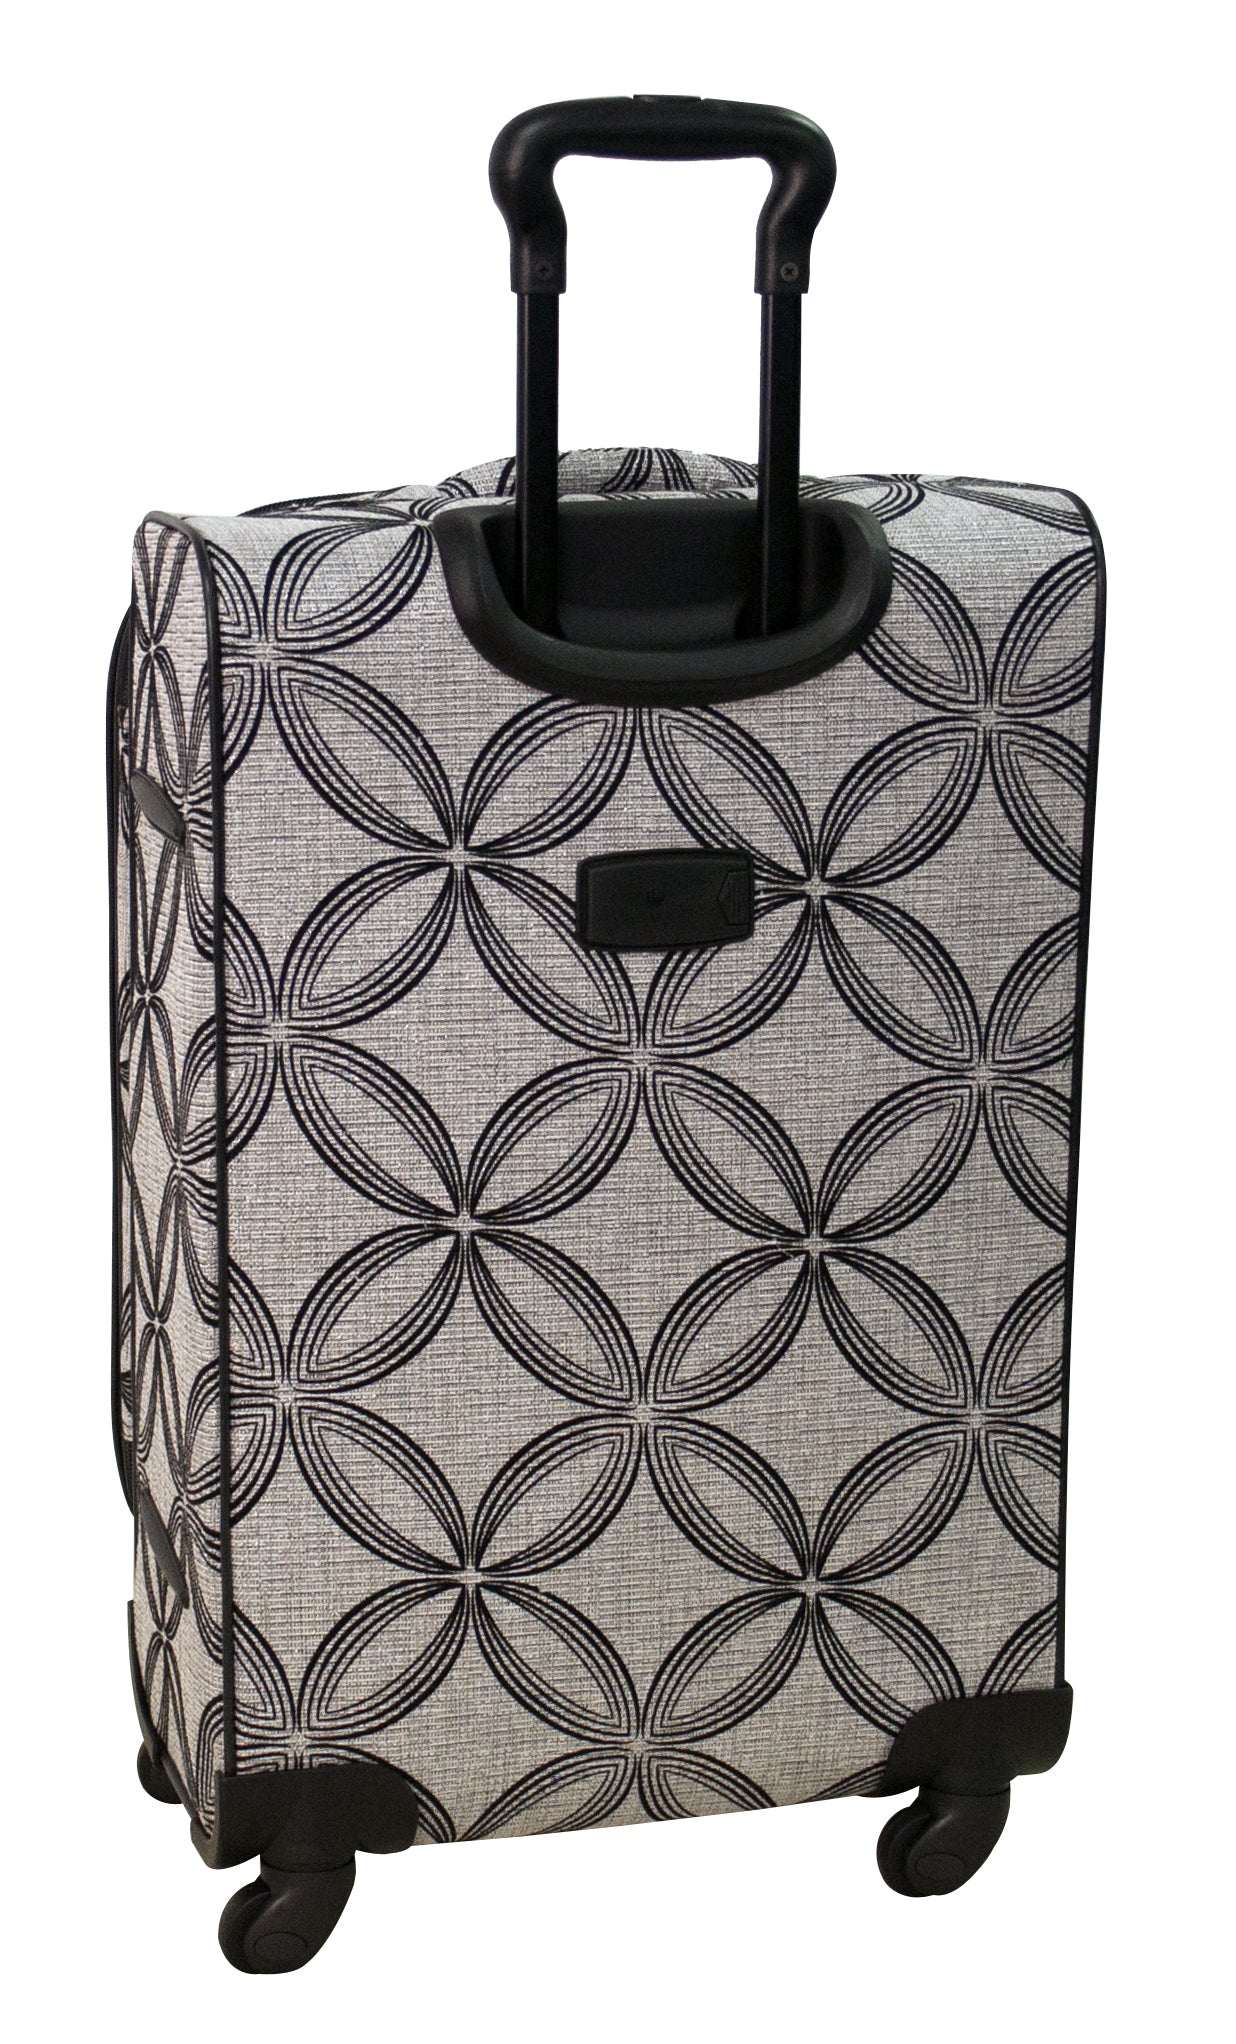 American Flyer Silver Clover 5-Piece Spinner Luggage Set